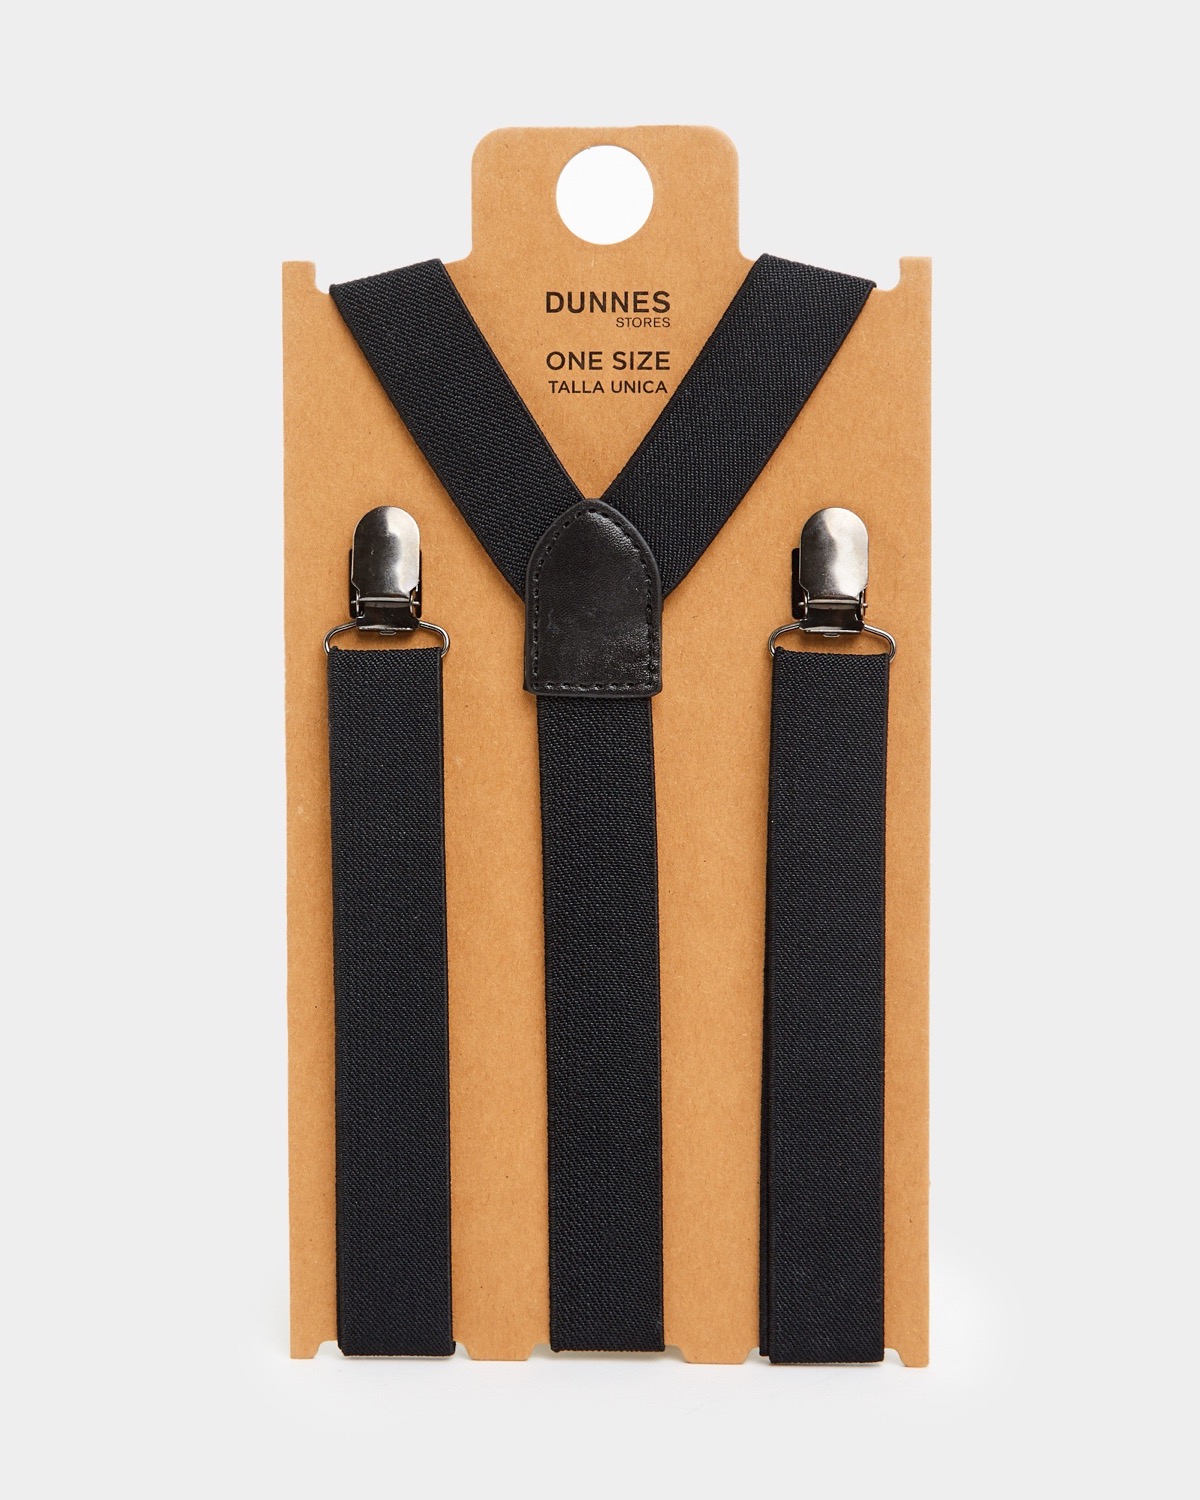 HOT Men Wear SUSPENDERS - The Fashion Tag Blog